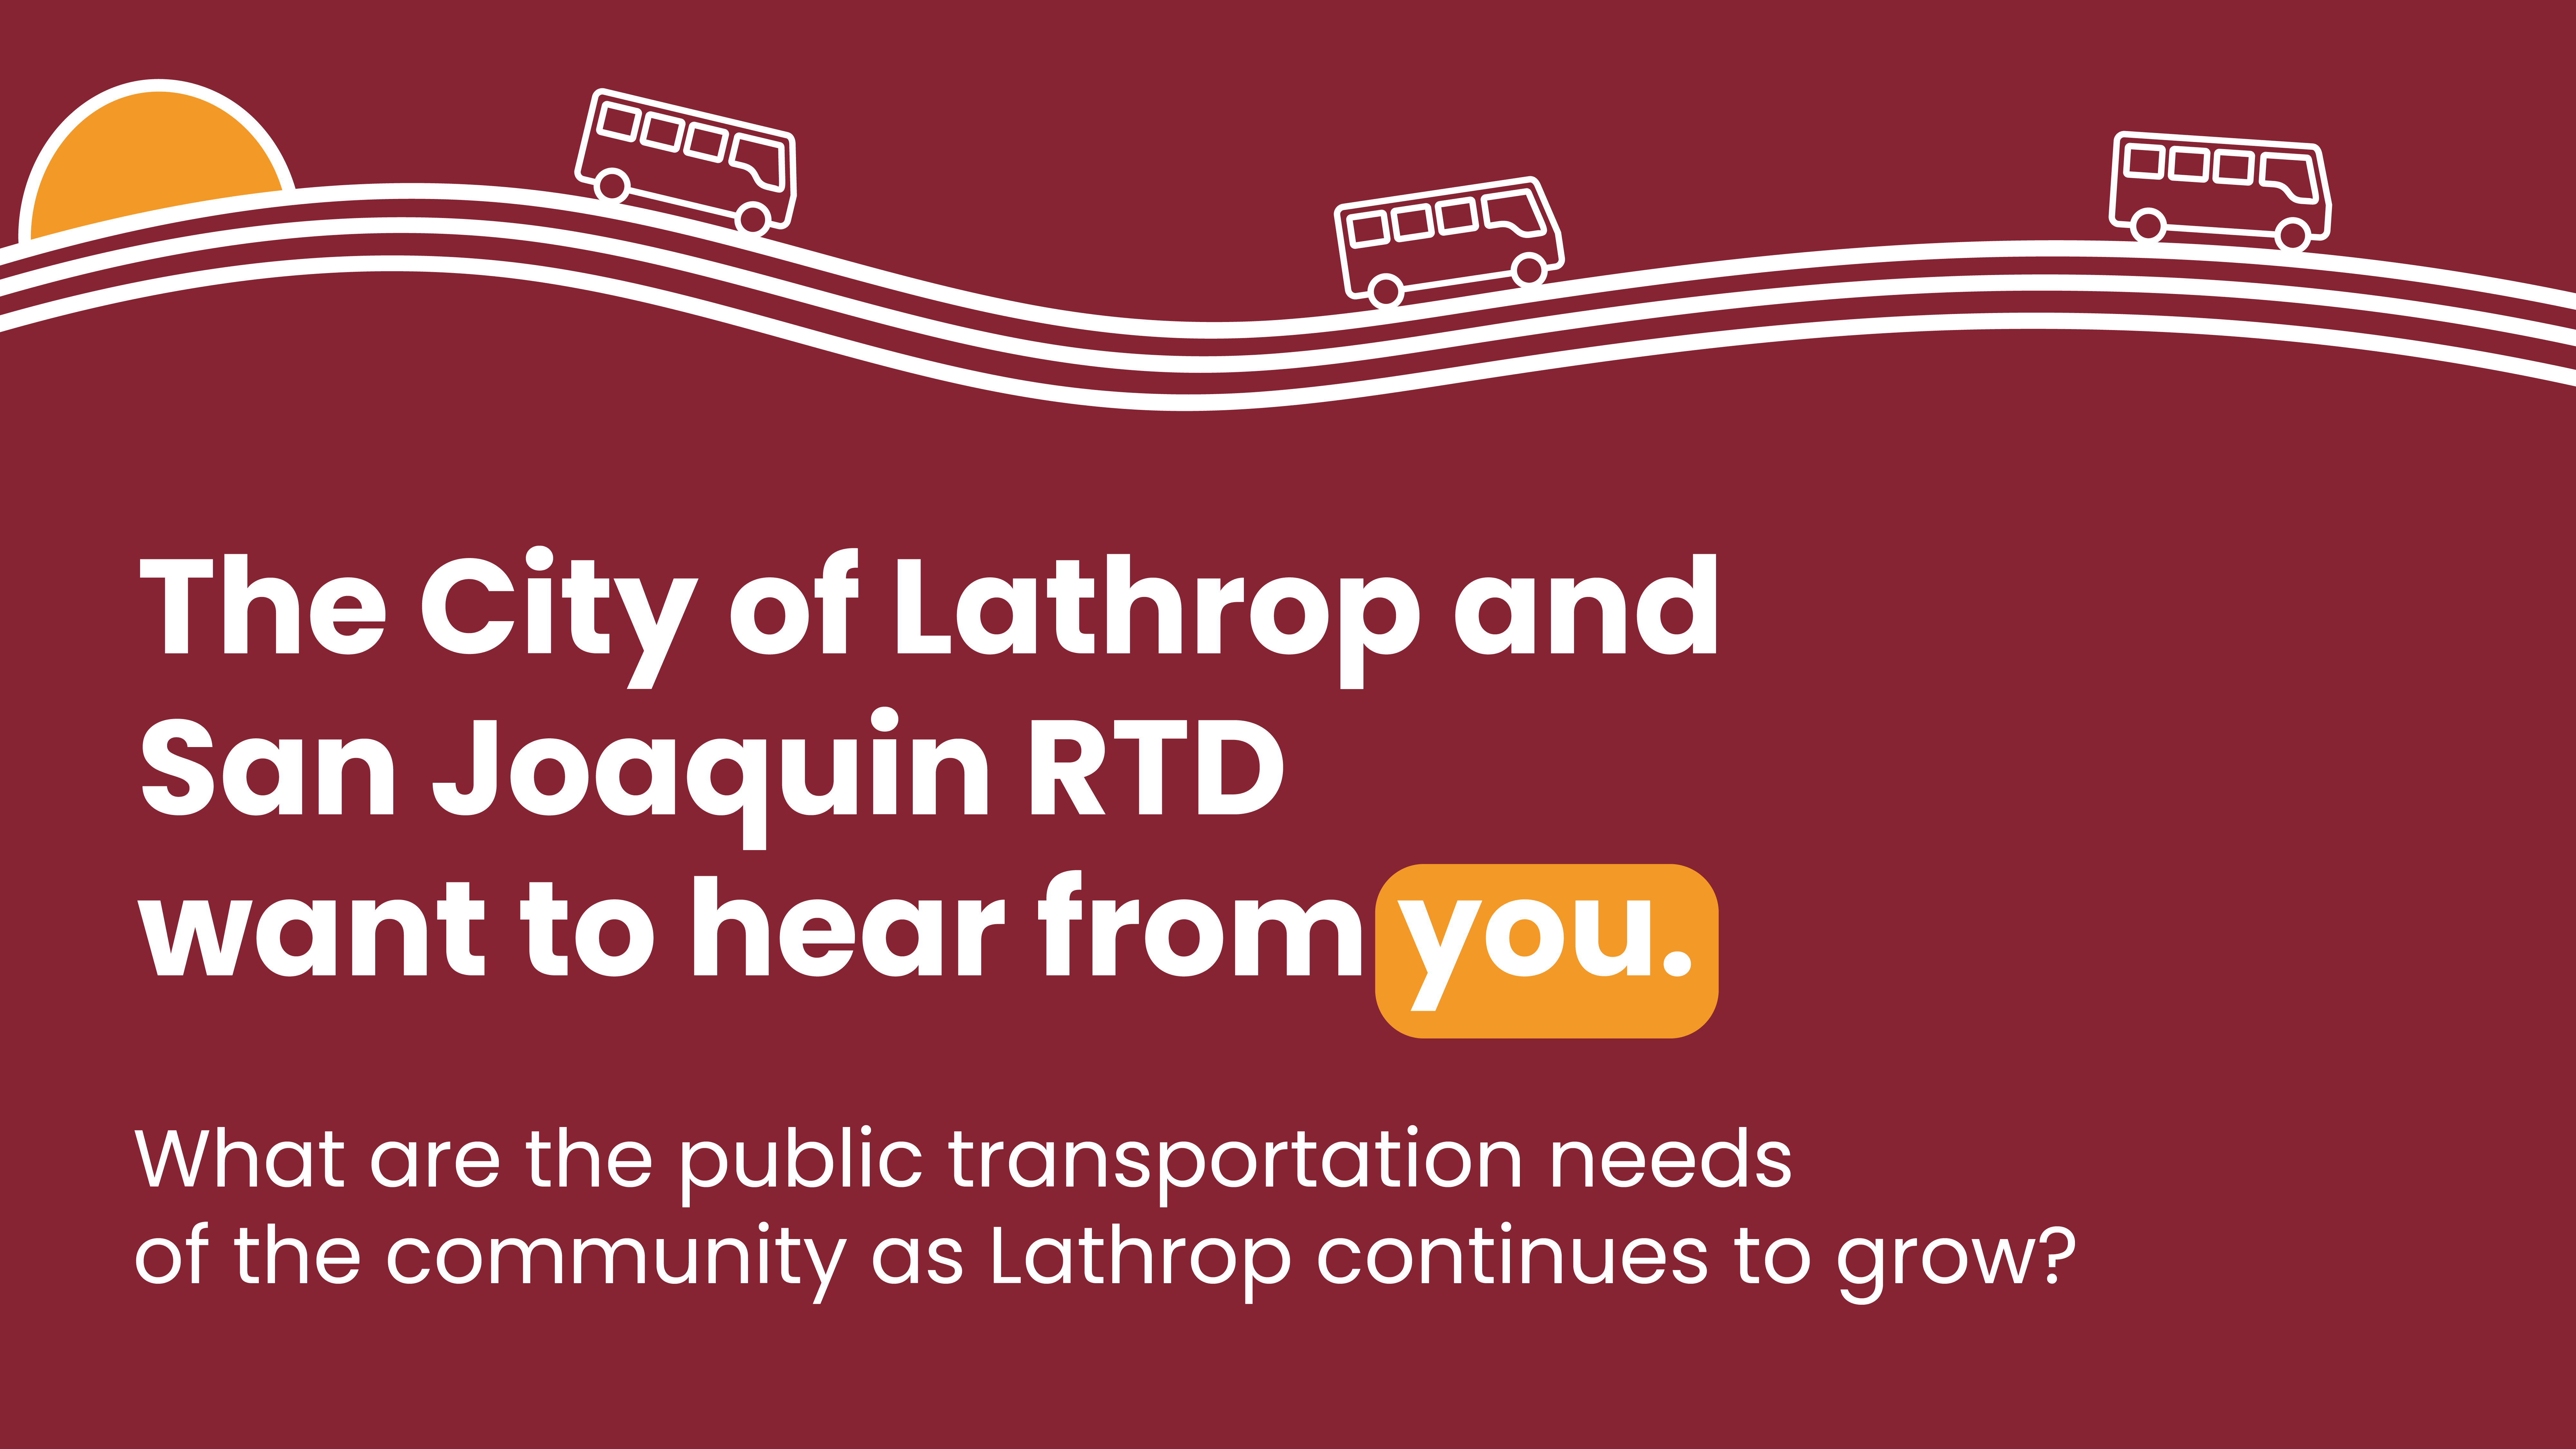 burgundy background with text describing the Lathrop and RTD transit study